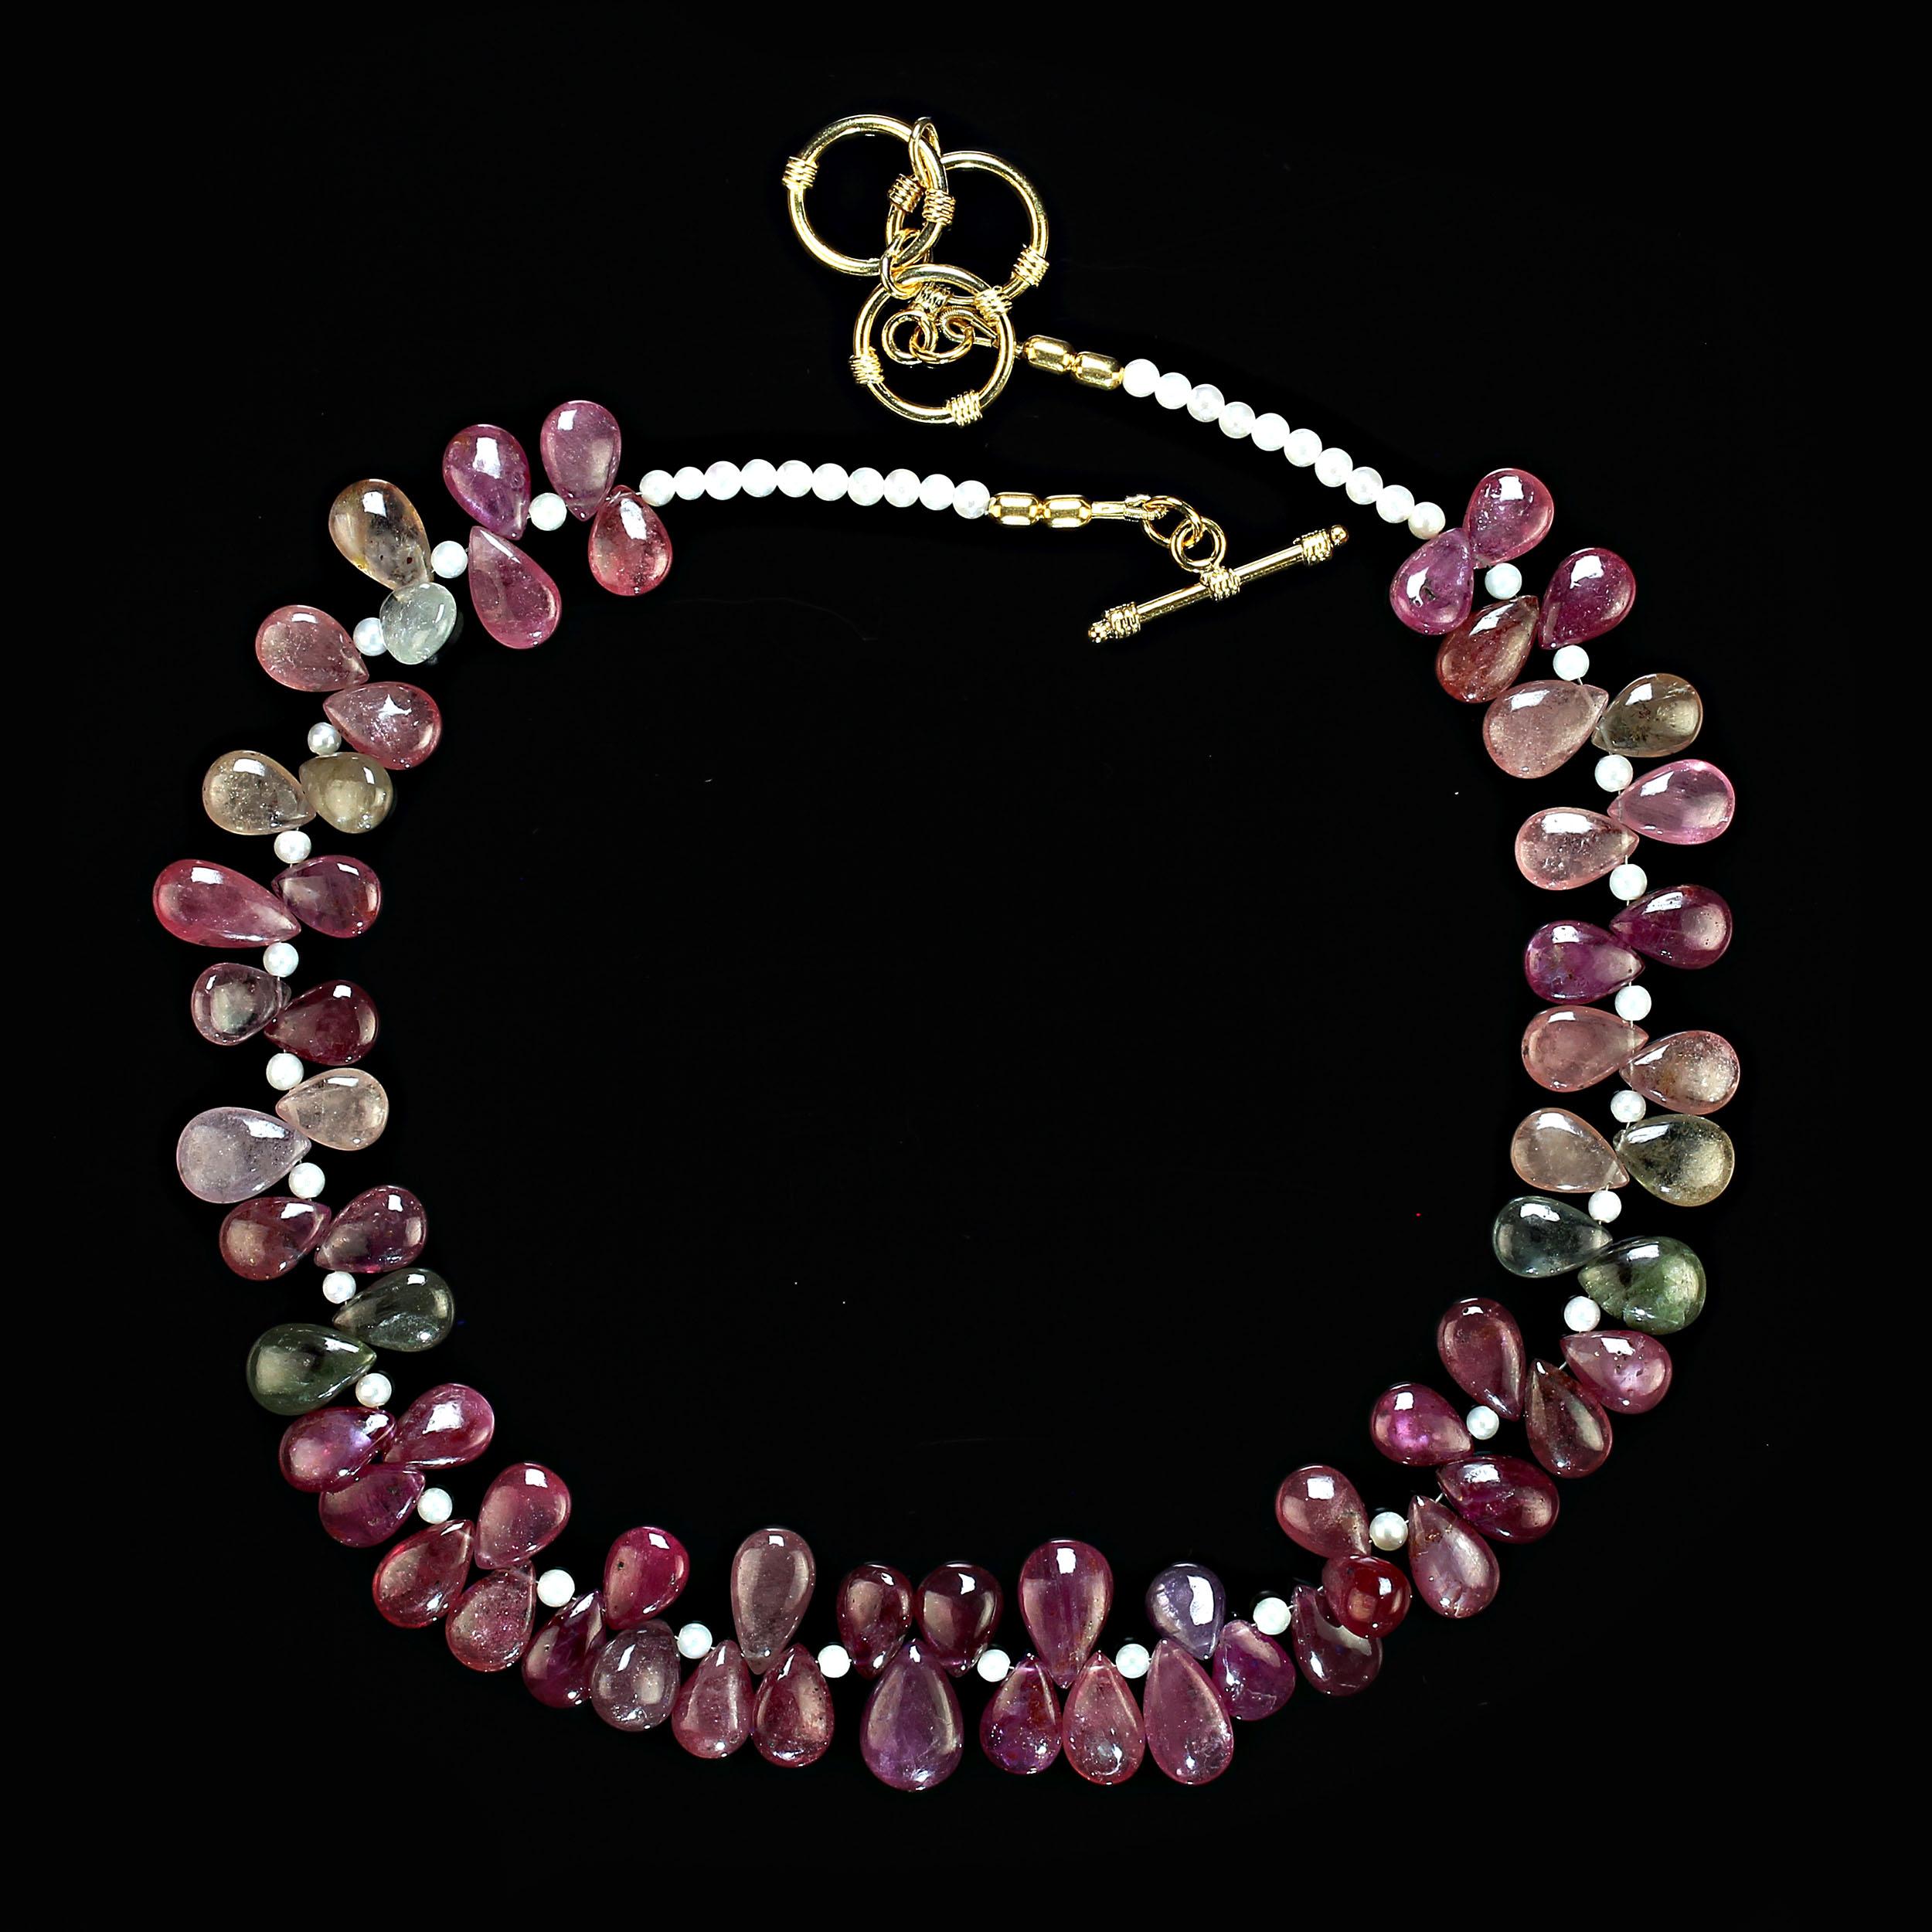 Artisan AJD 18 Inch Highly Polished Multi-color Graduated Sapphire Necklace Great Gift! For Sale